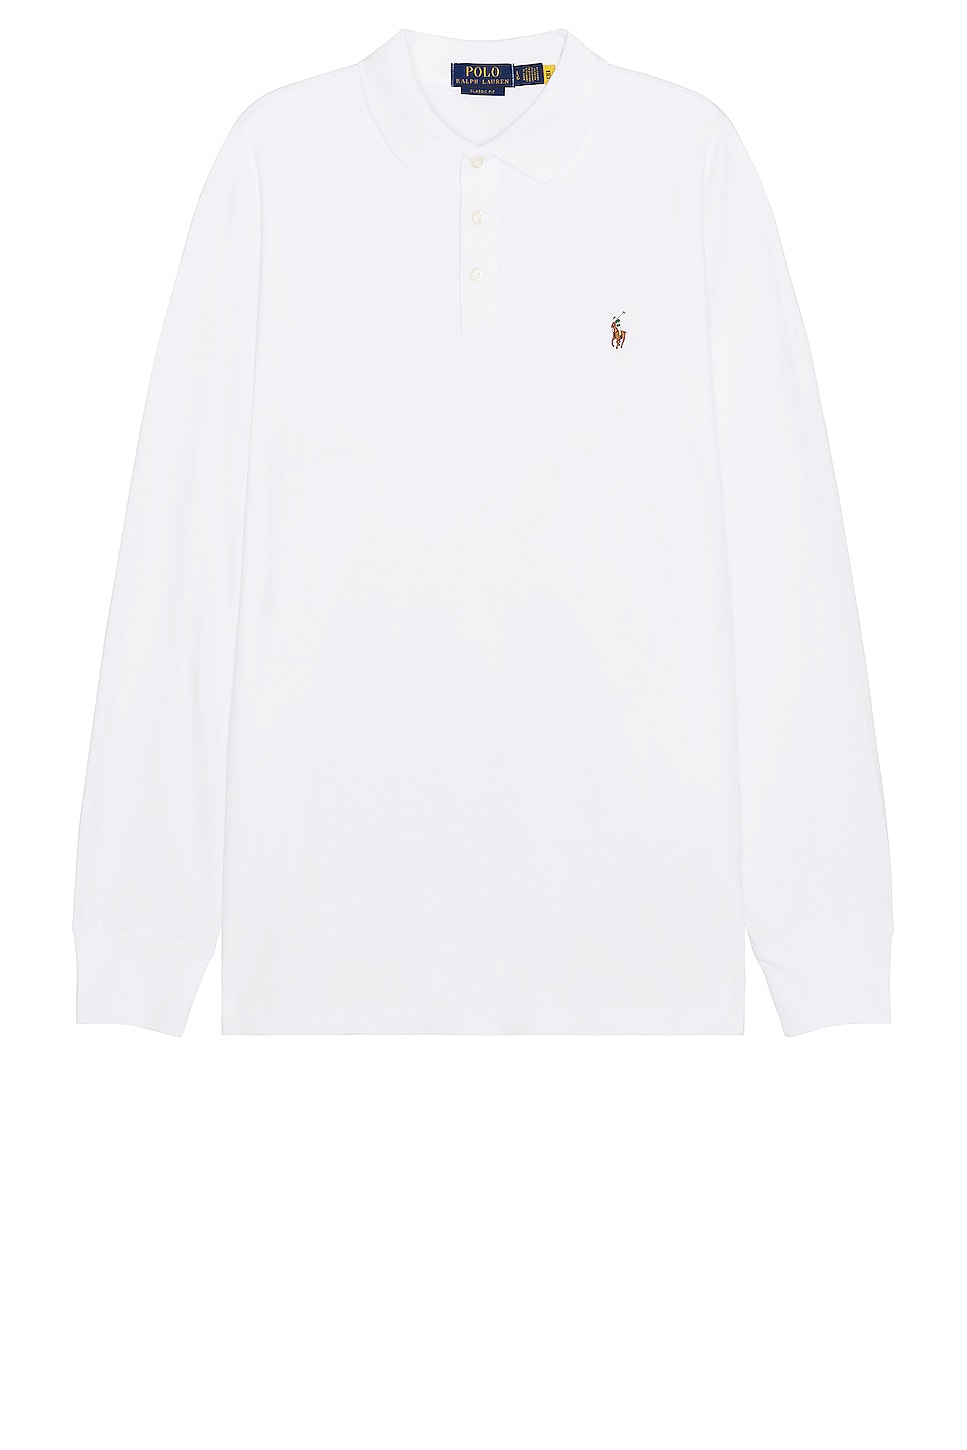 Image 1 of Polo Ralph Lauren Pima Long Sleeve Polo in White